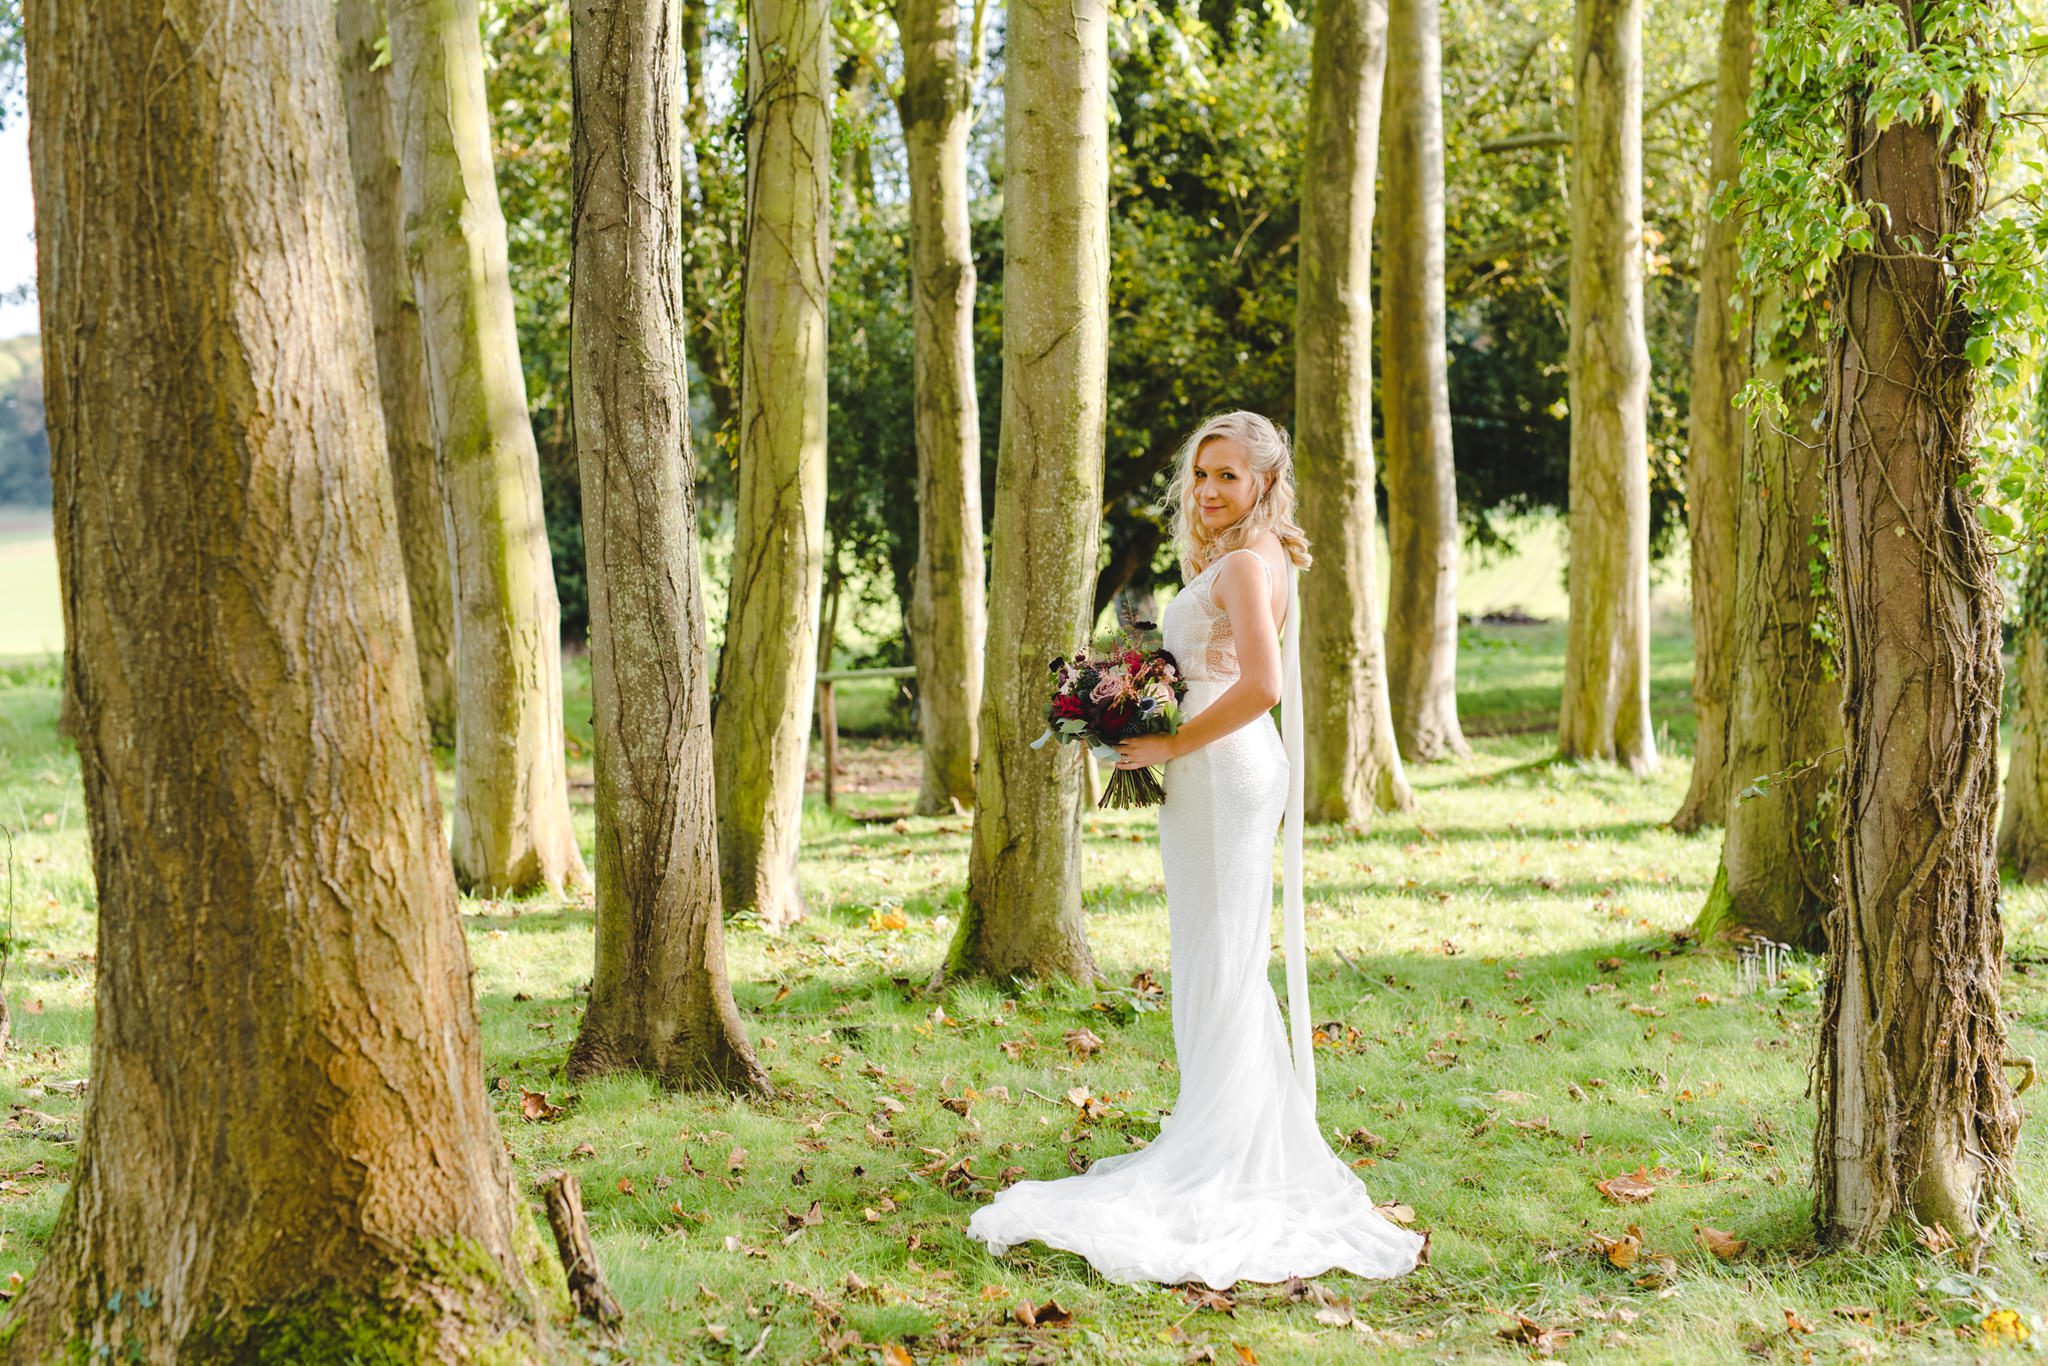 A bride standing in the gardens at Brinsop Court